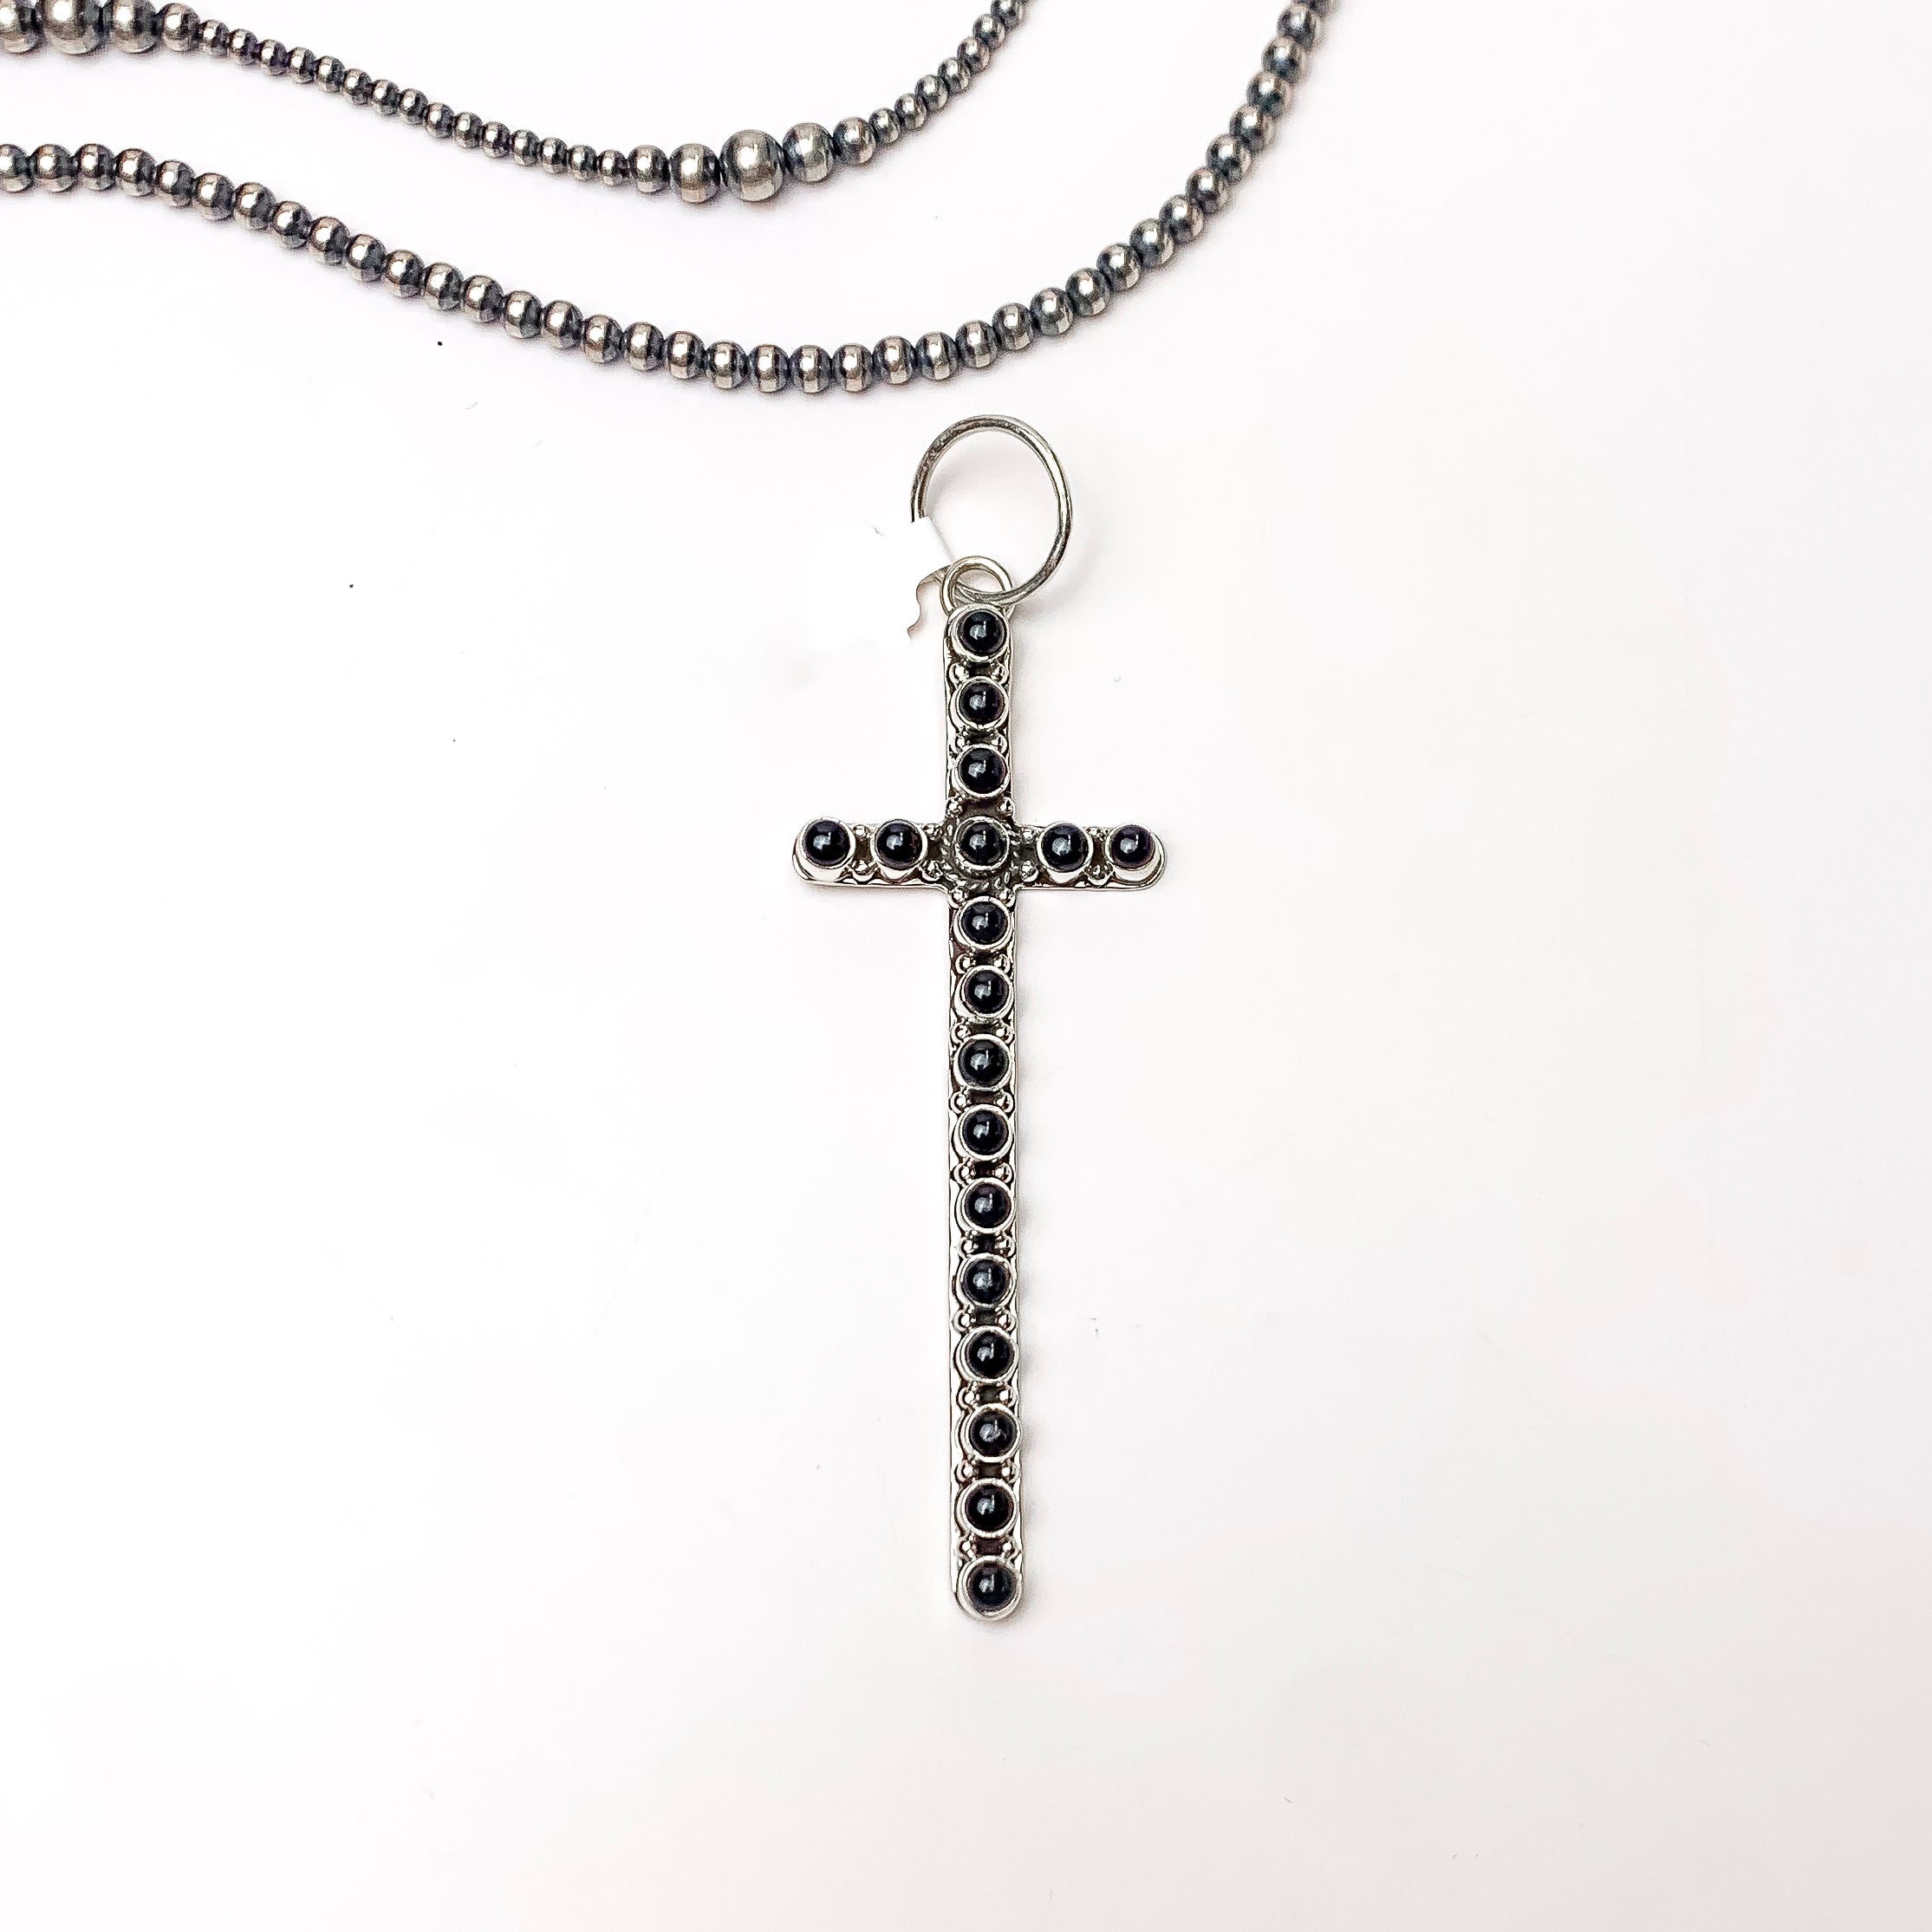 In the picture is a black onyix cross pendant with a white background